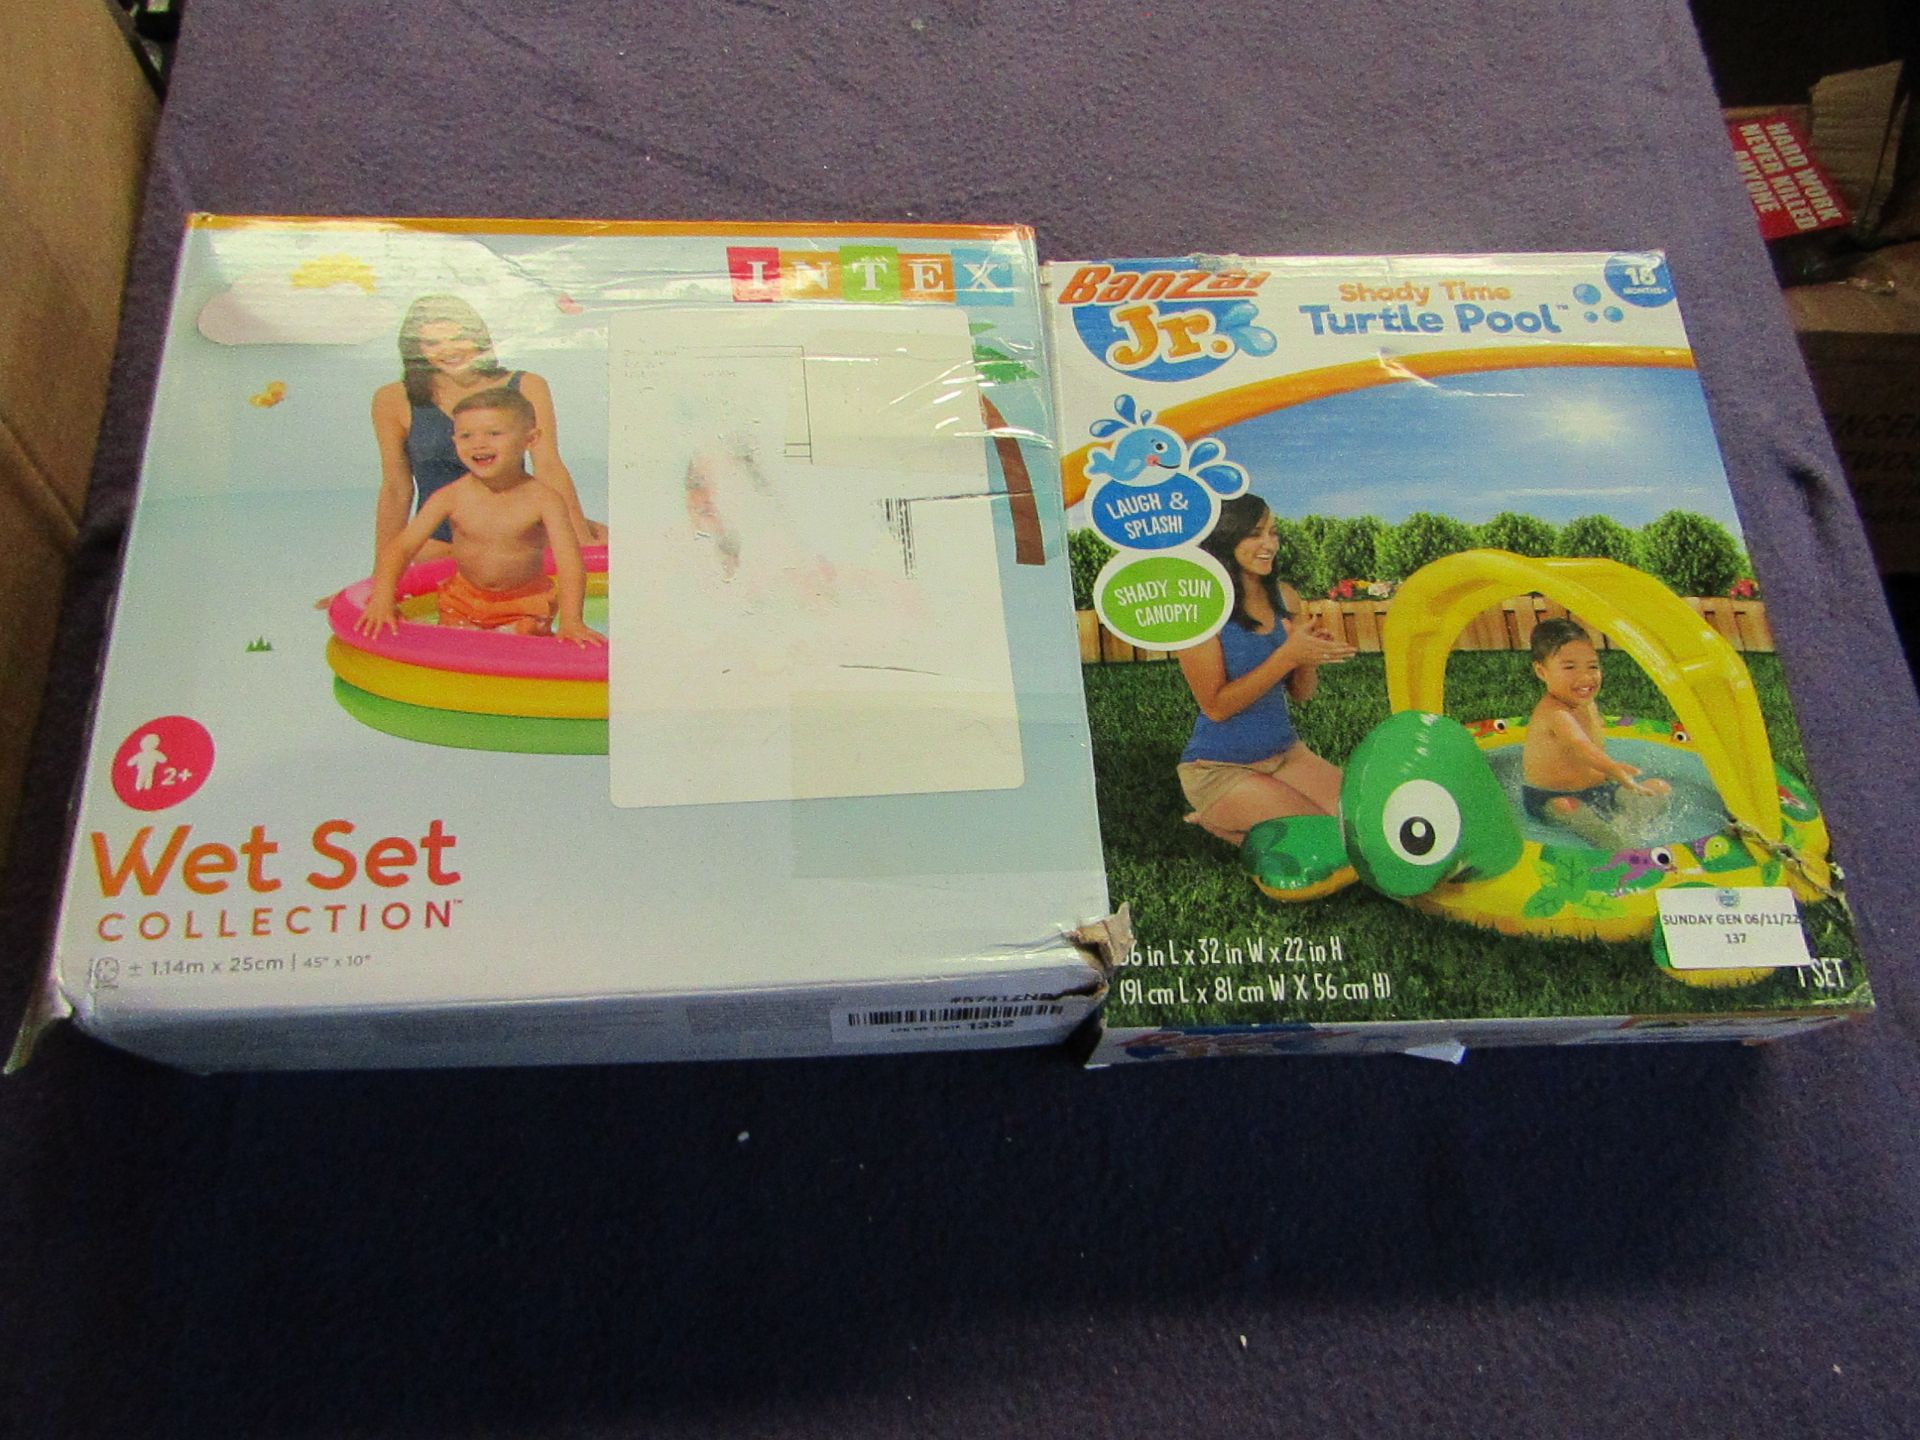 1x Banza JR - Turtle Pool - Unchecked & Boxed. 1x Intex - Wet Set Collection Pool - Unchecked &